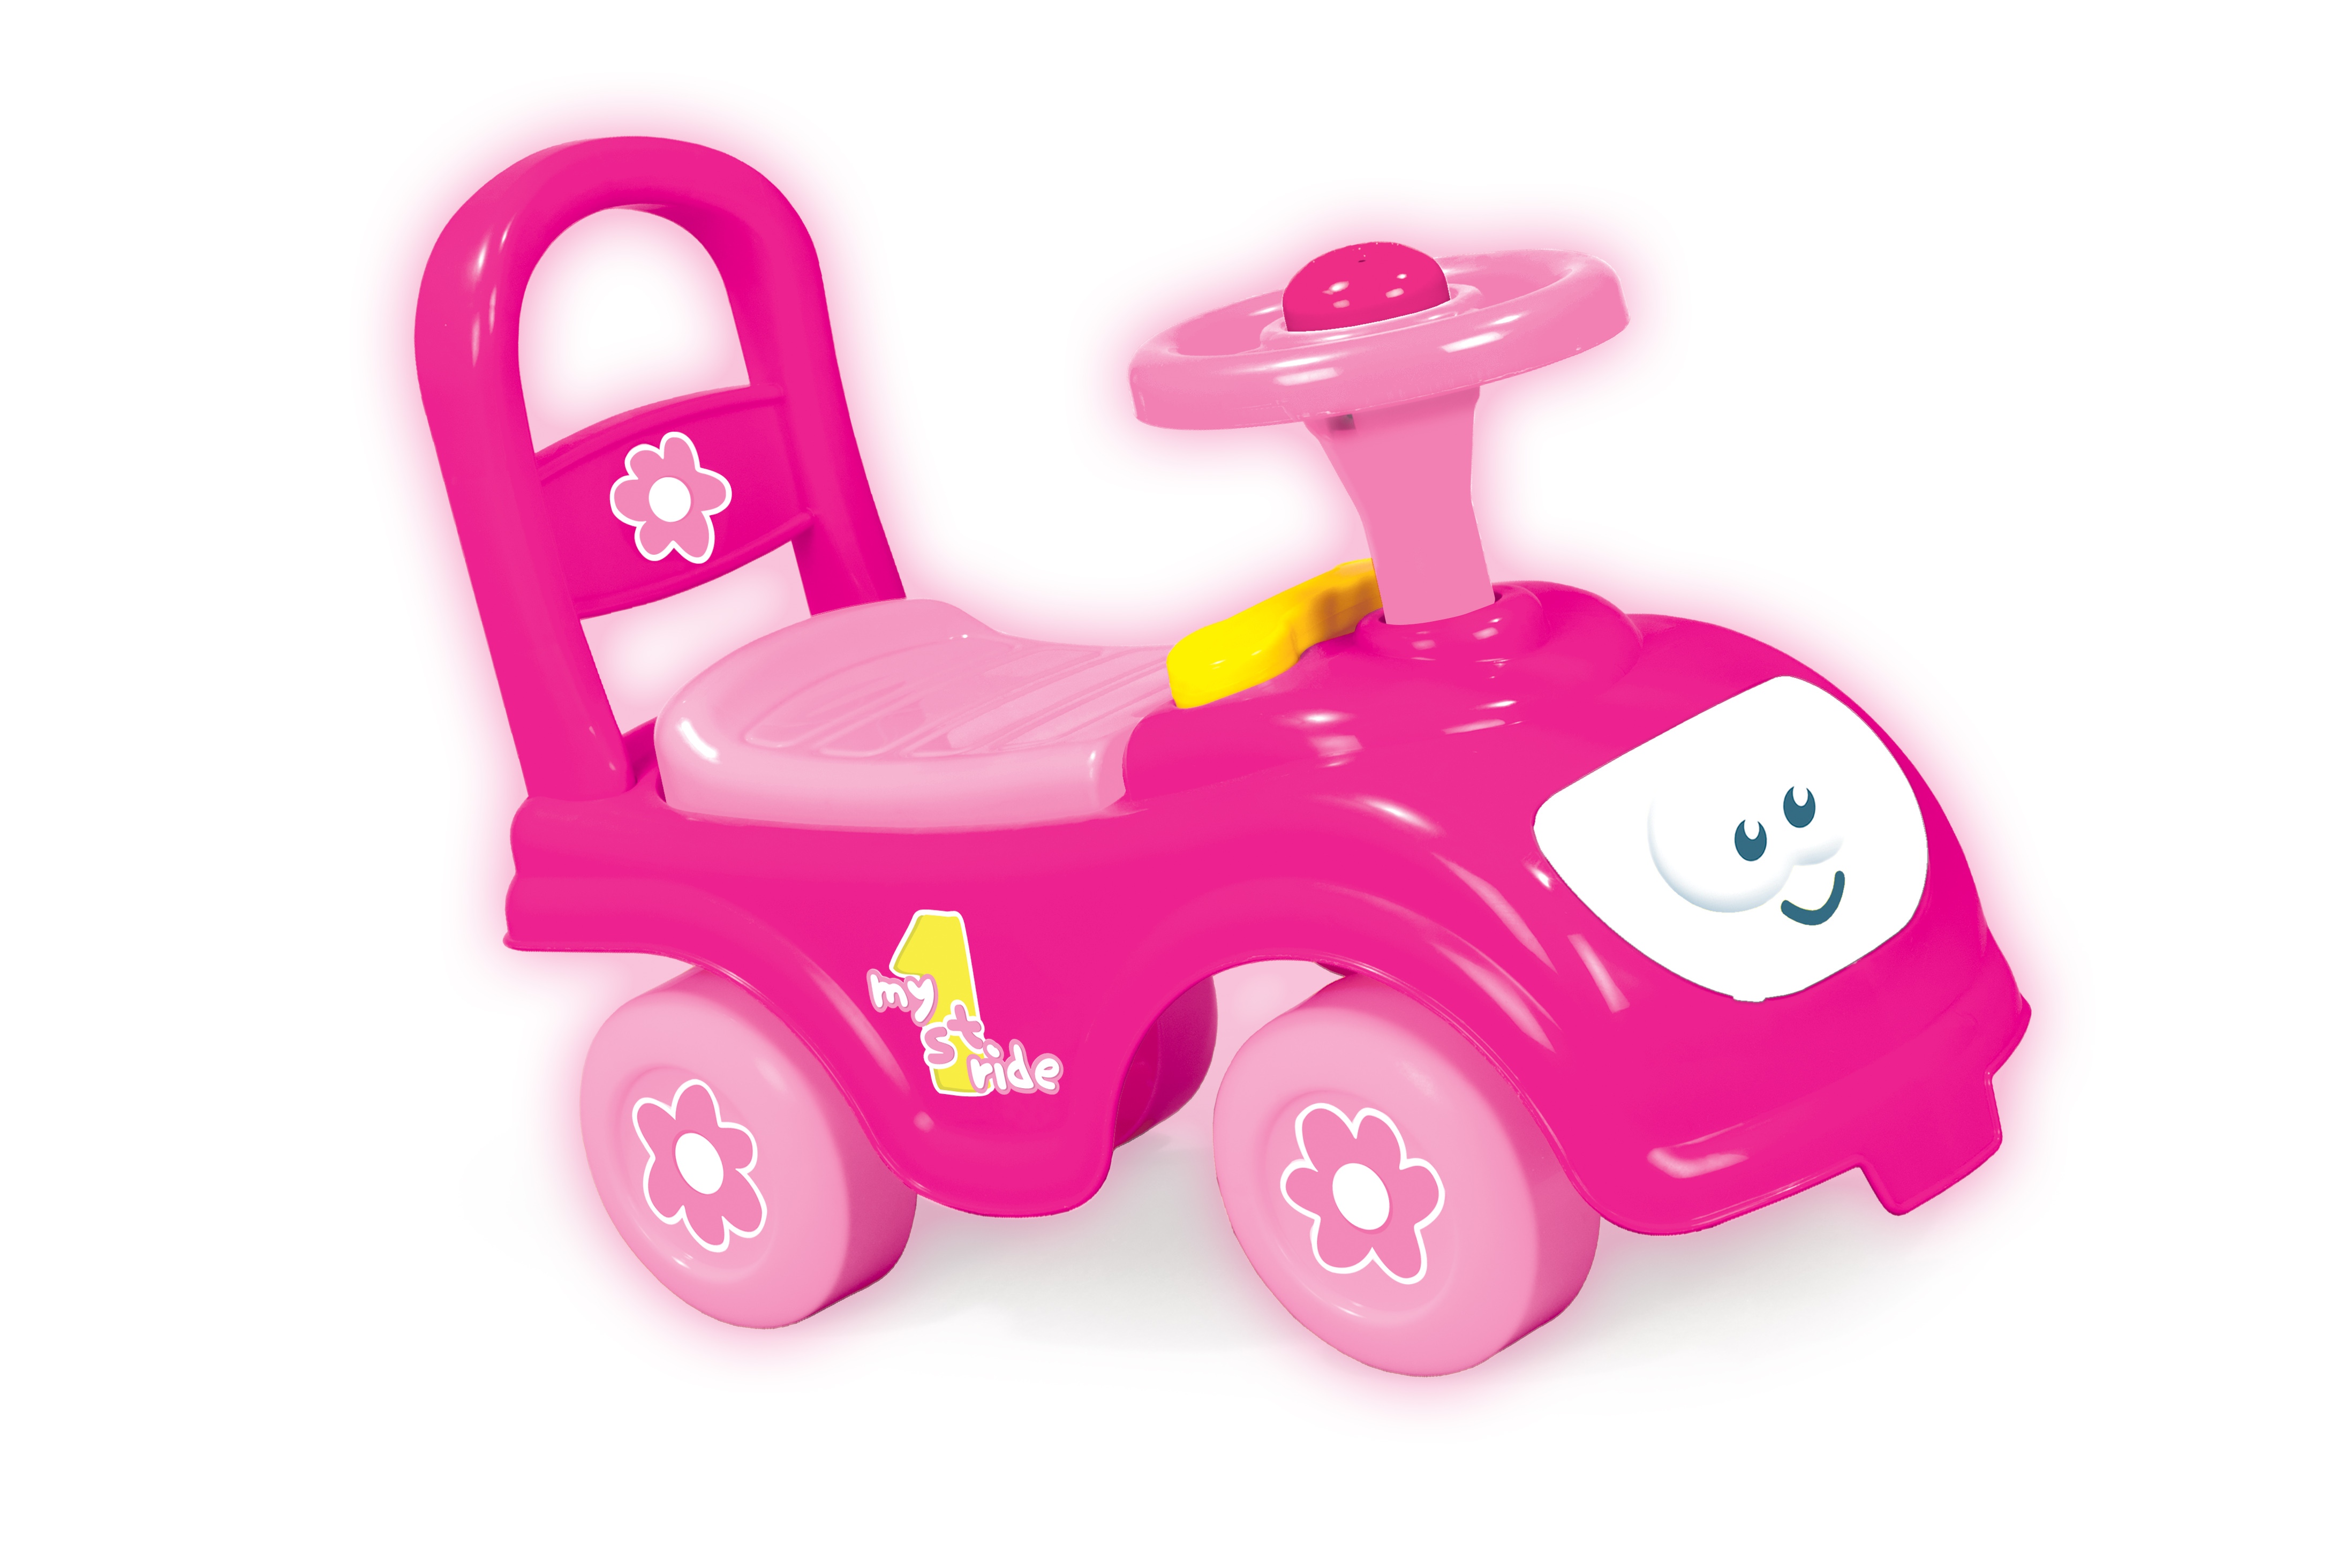 girl ride on toy car